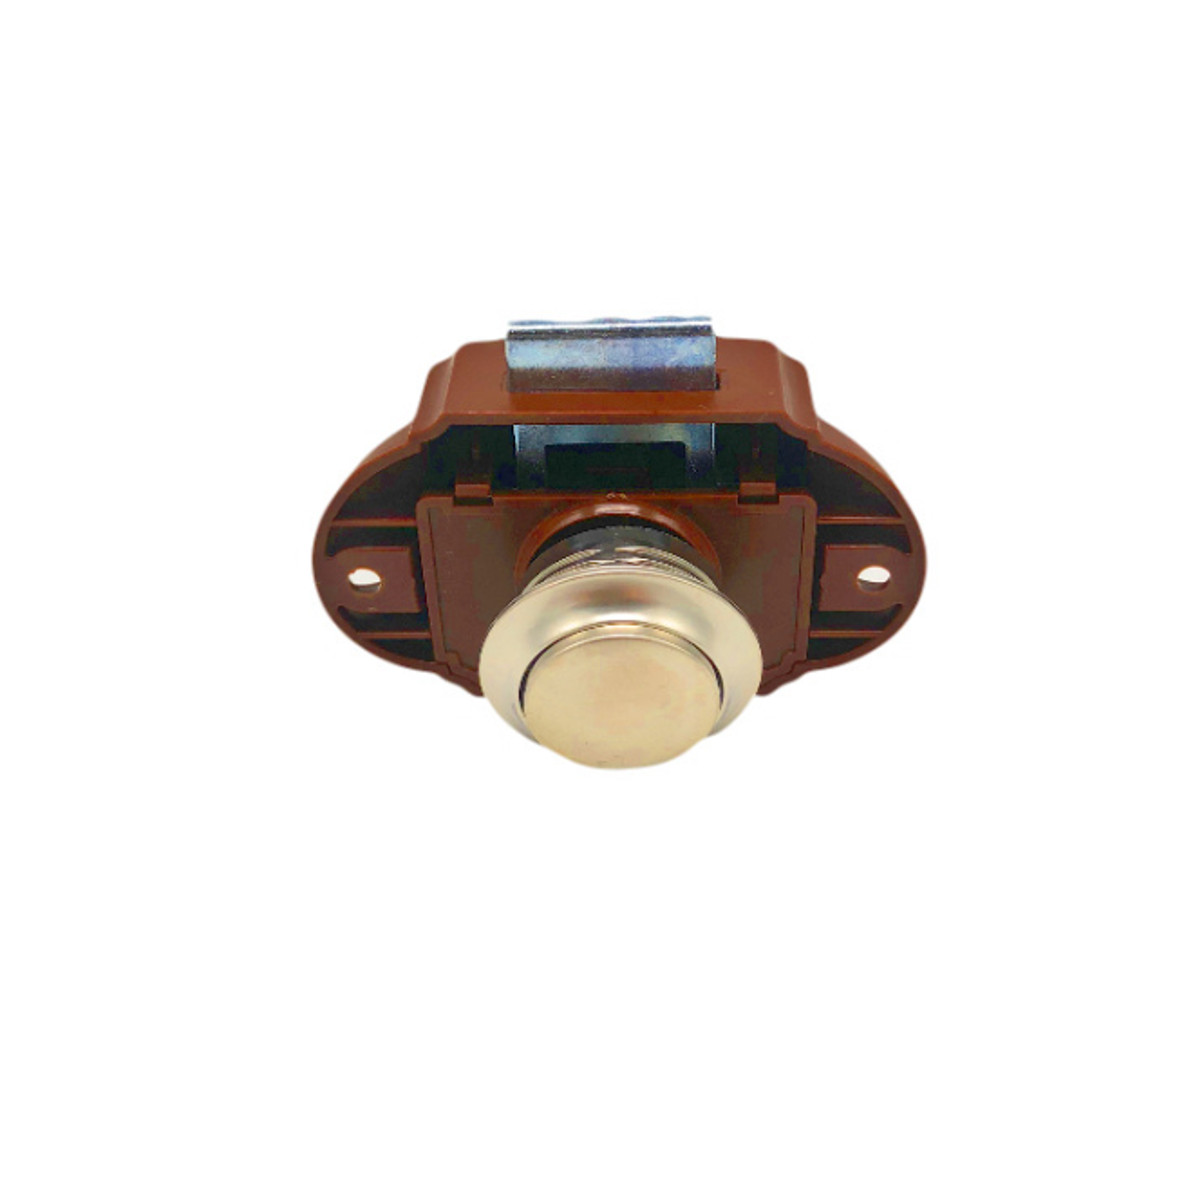 Find Push Button Catch Lock Drawer Cupboard Door Motorhome Caravan Cabinet Latch Knob for Sale on Gipsybee.com with cryptocurrencies